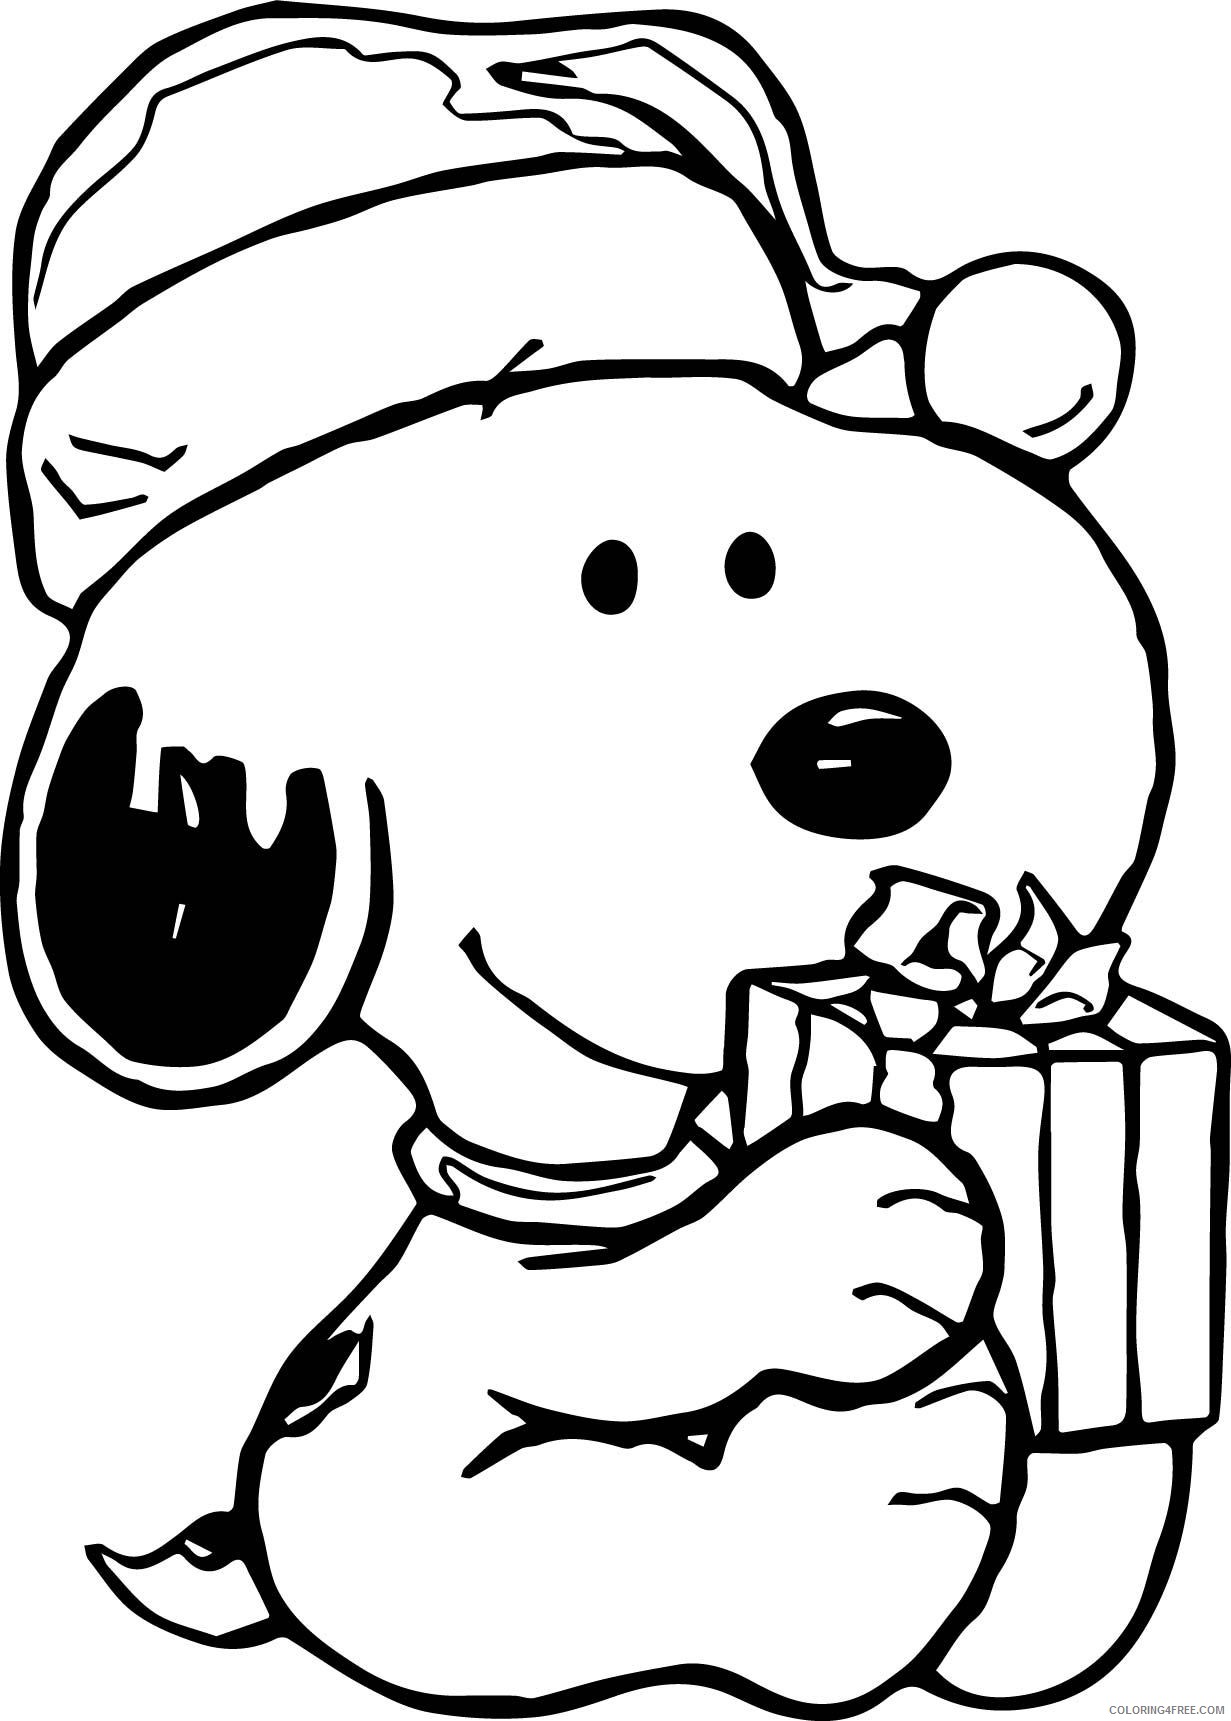 Snoopy Coloring Pages Cartoons Charlie Brown Christmas Snoopys Gift Printable 2020 5639 Coloring4free